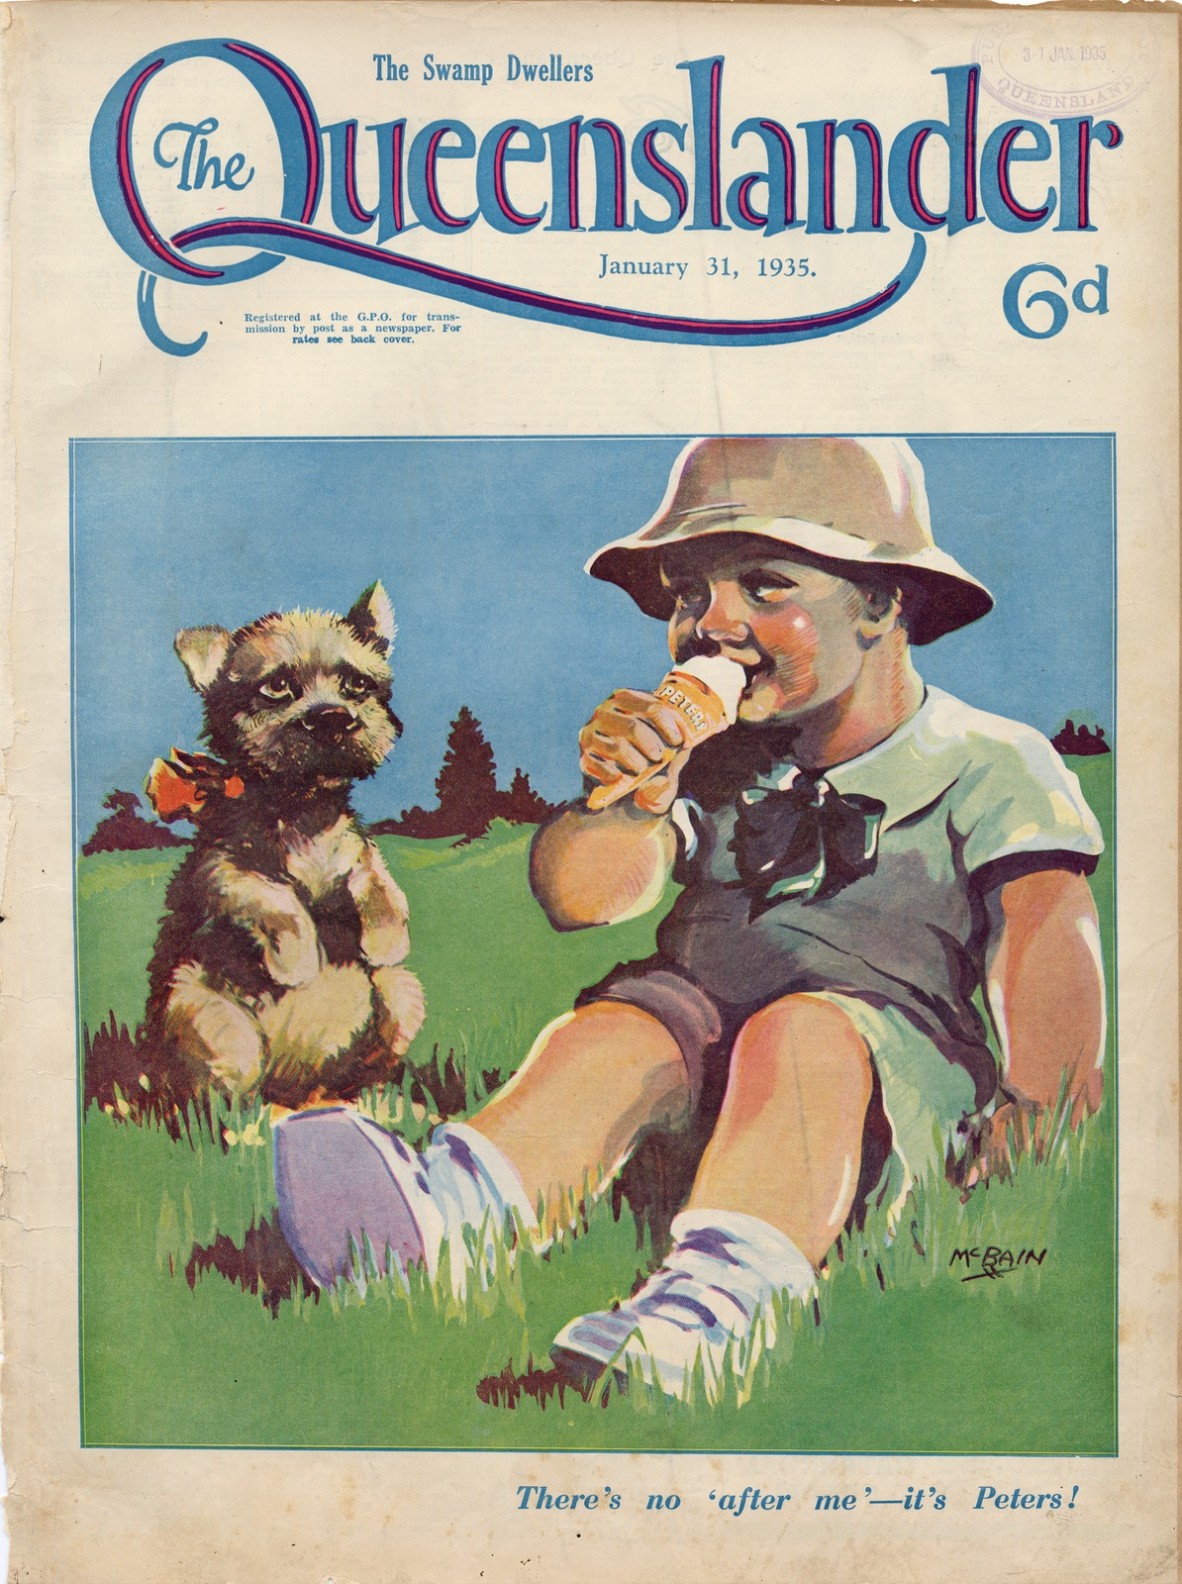 A child eating ice cream with a dog